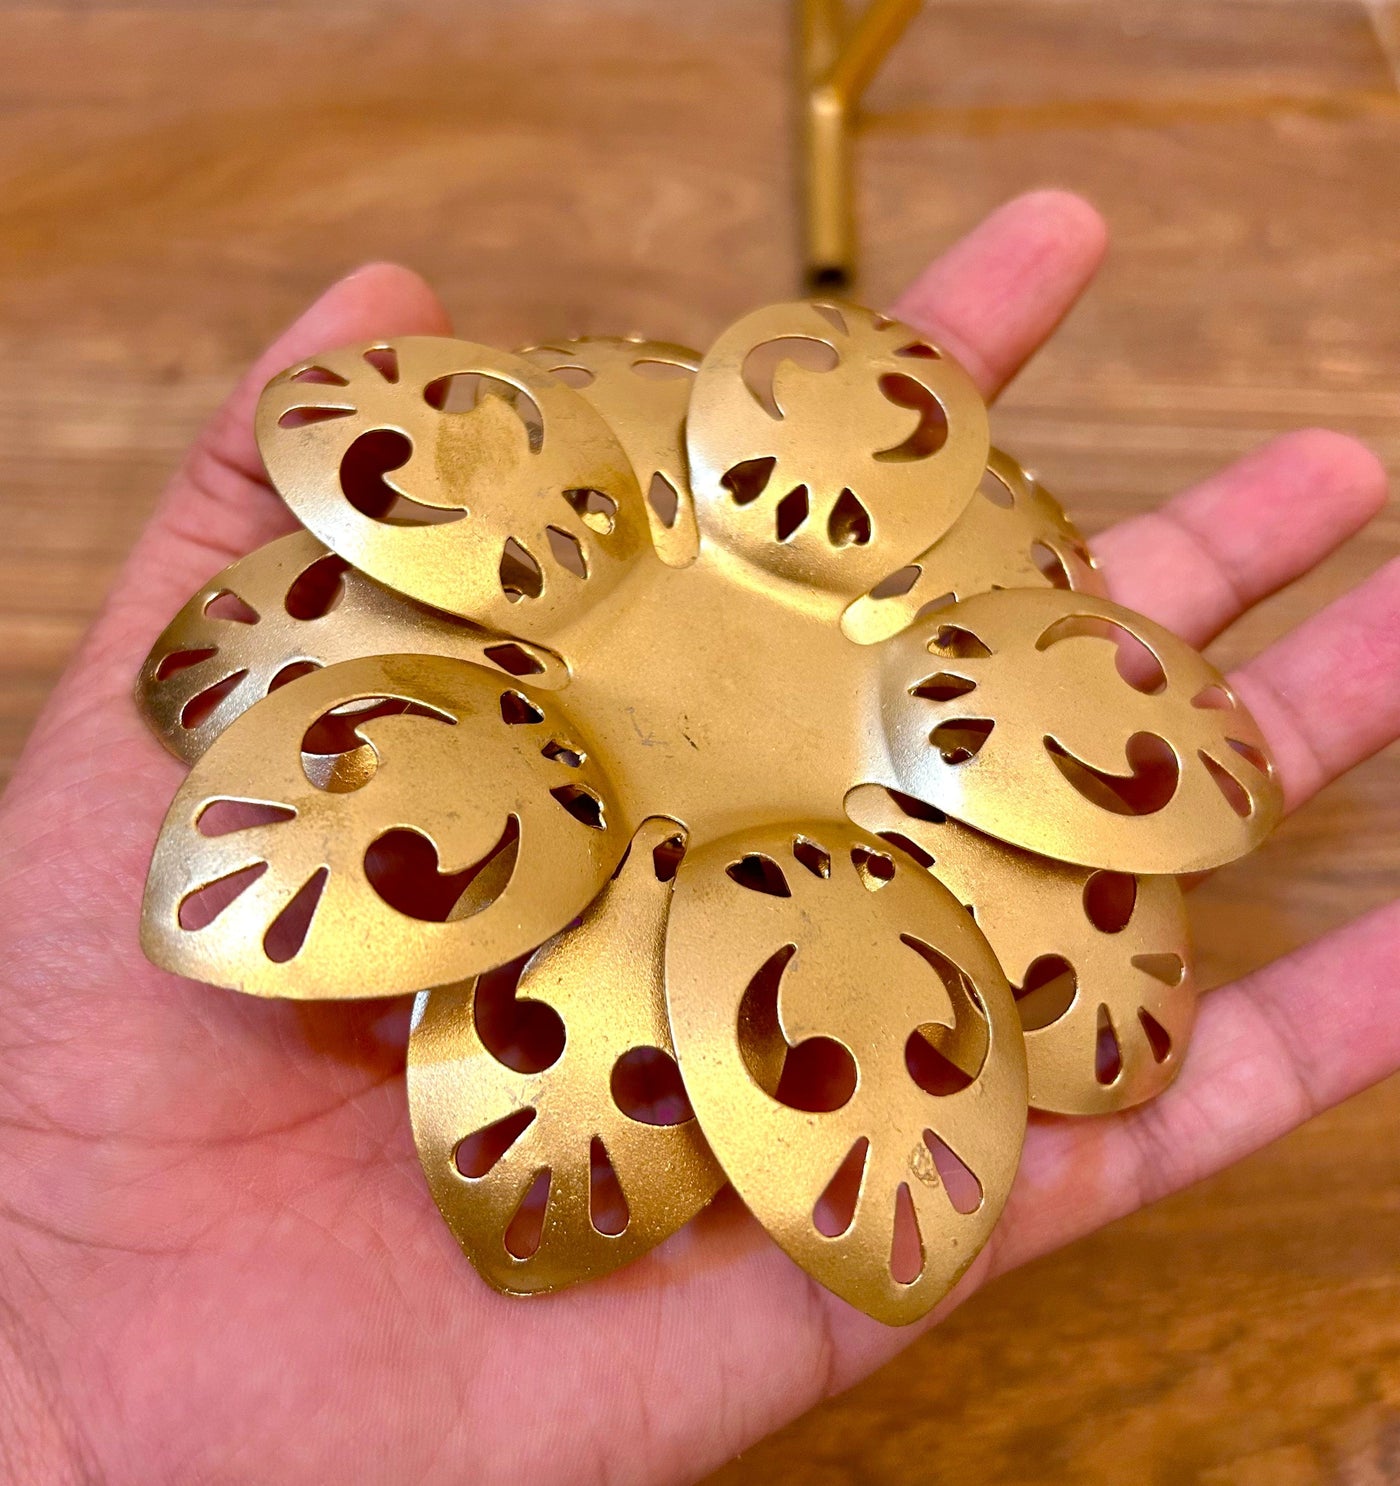 70 Rs each pc on buying 50+ qty | Whatsapp at 8619550223 candle holder LAMANSH Metal Lotus Diya stand | Floral shape golden candle 🕯️holder for diwali & Navratri decor / Return gifting 🎁